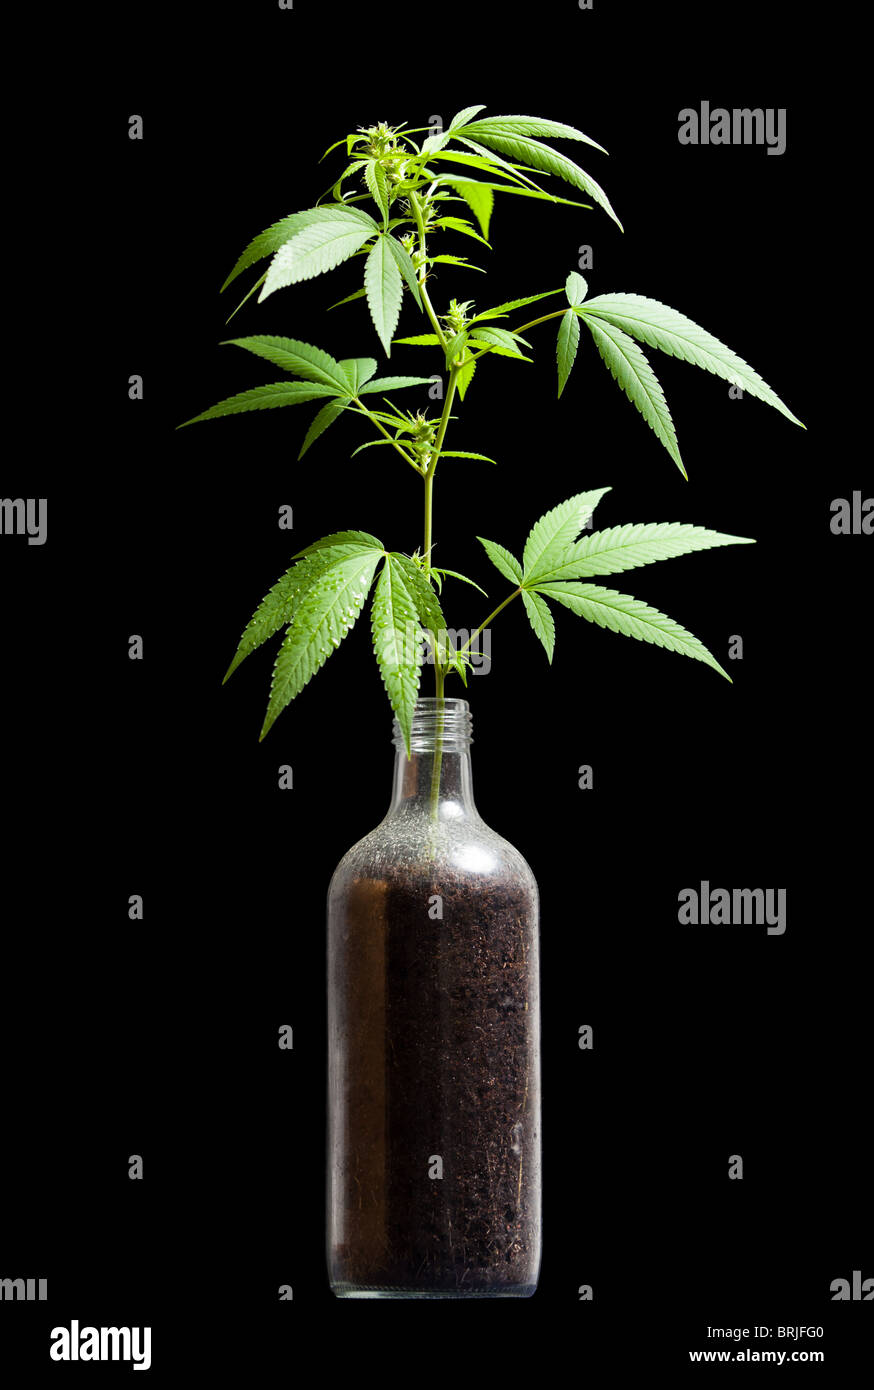 Cannabis sativa plant growing out from a bottle; a metaphor for prohibition Stock Photo